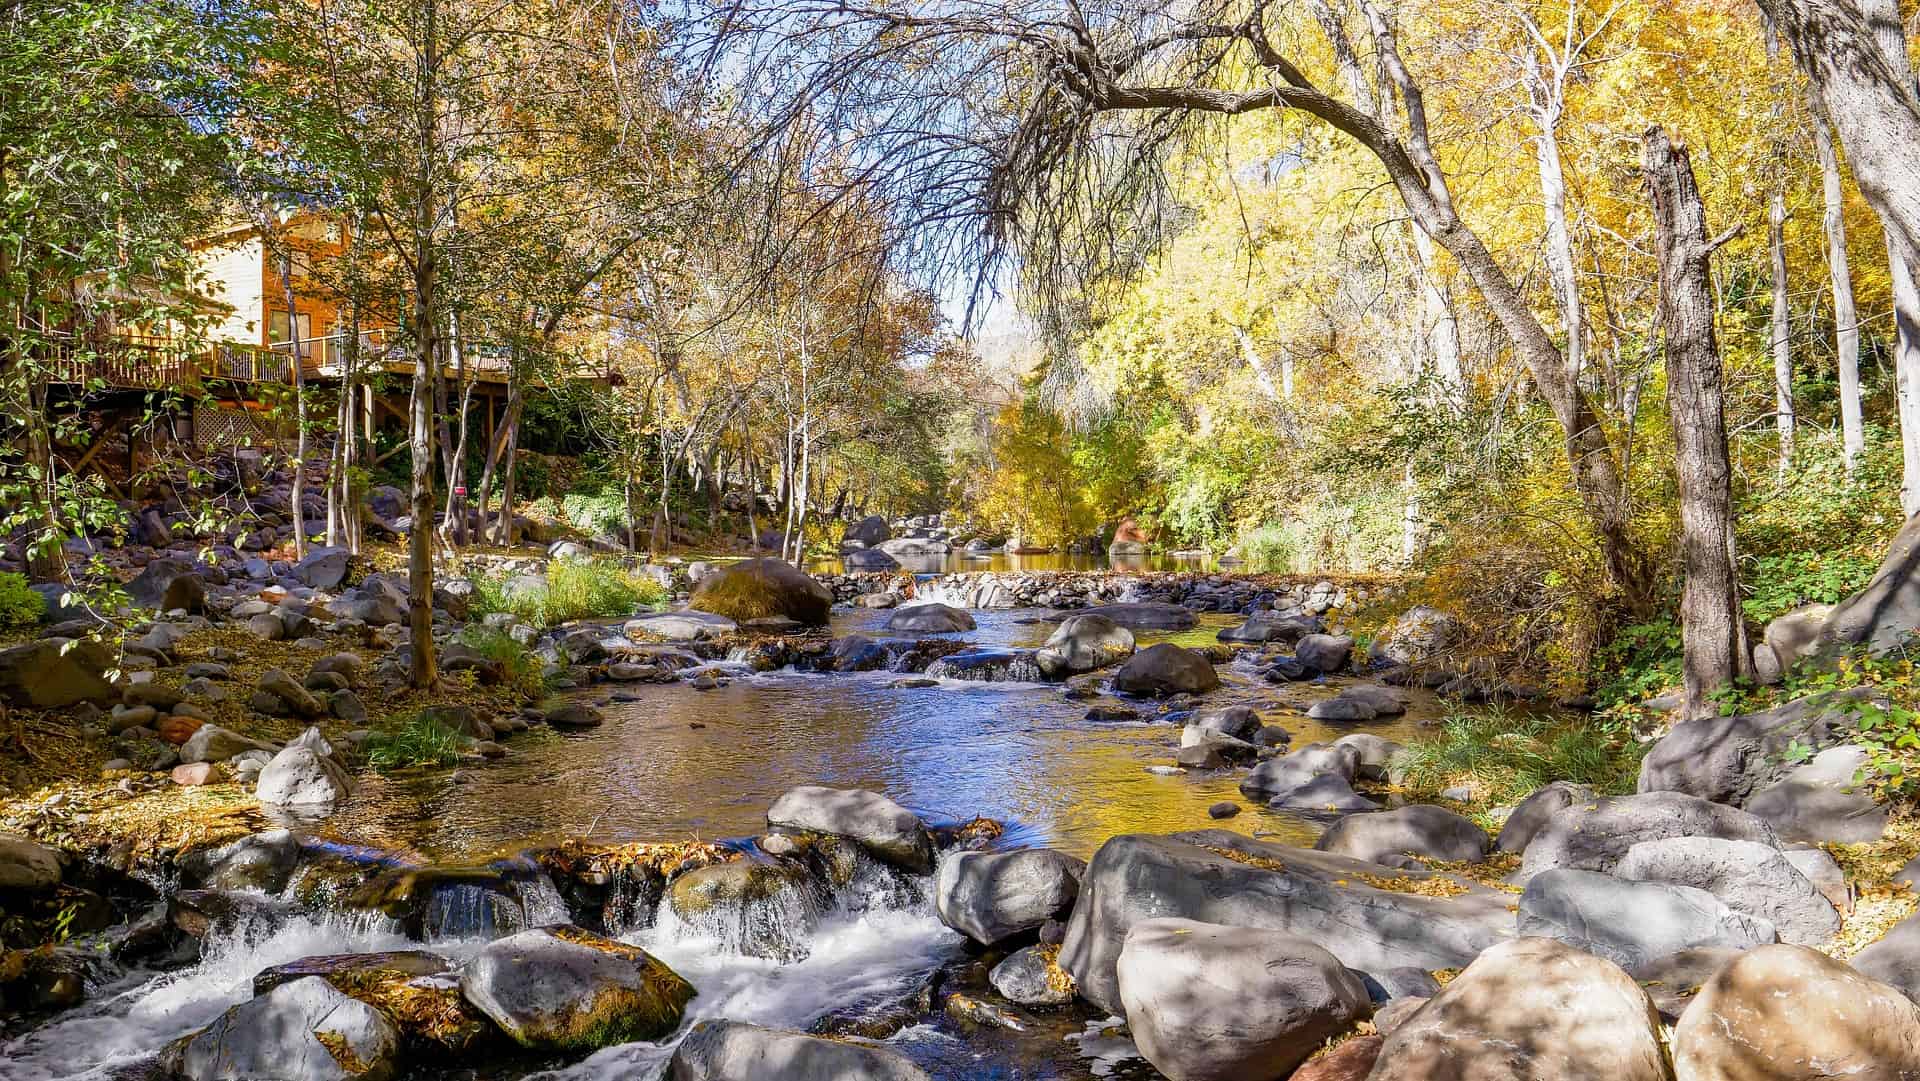 Best things to do in Sedona Arizona - Leisa Peterson - Oak Creek by Mike2m on Pixabay 5792114